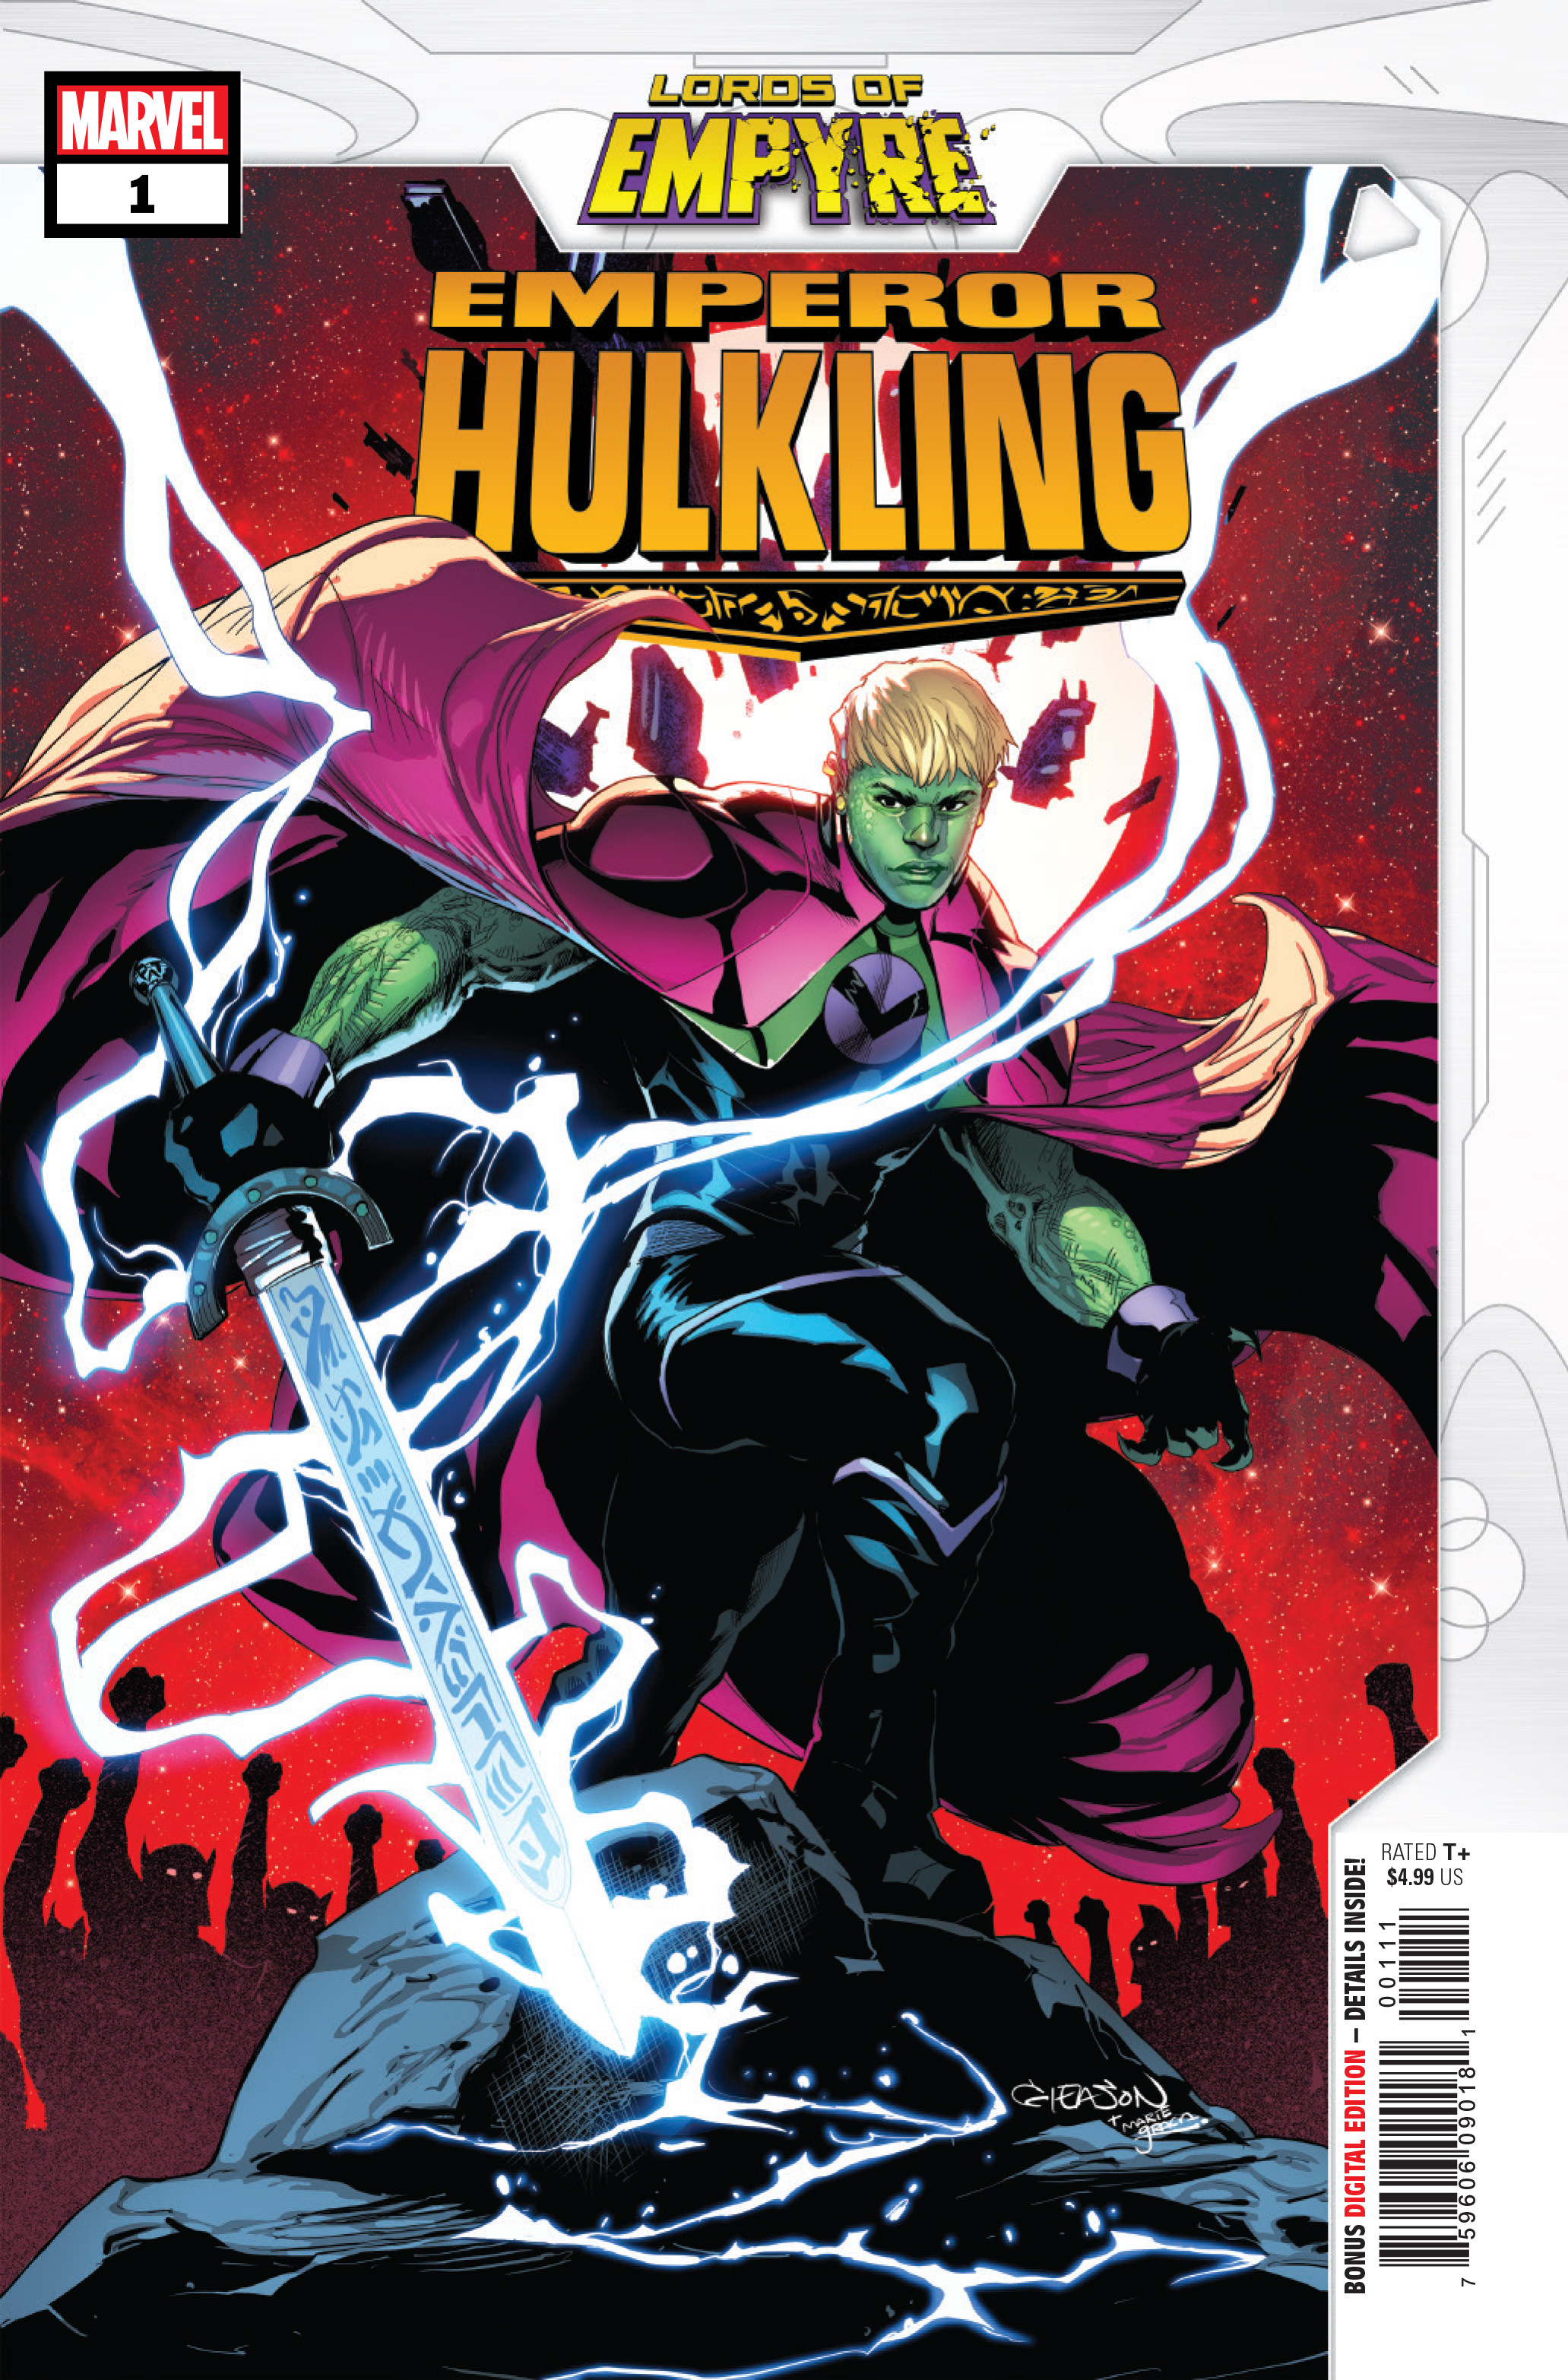 Emperor Hulkling #1 Cover.  Published by Marvel Entertainment